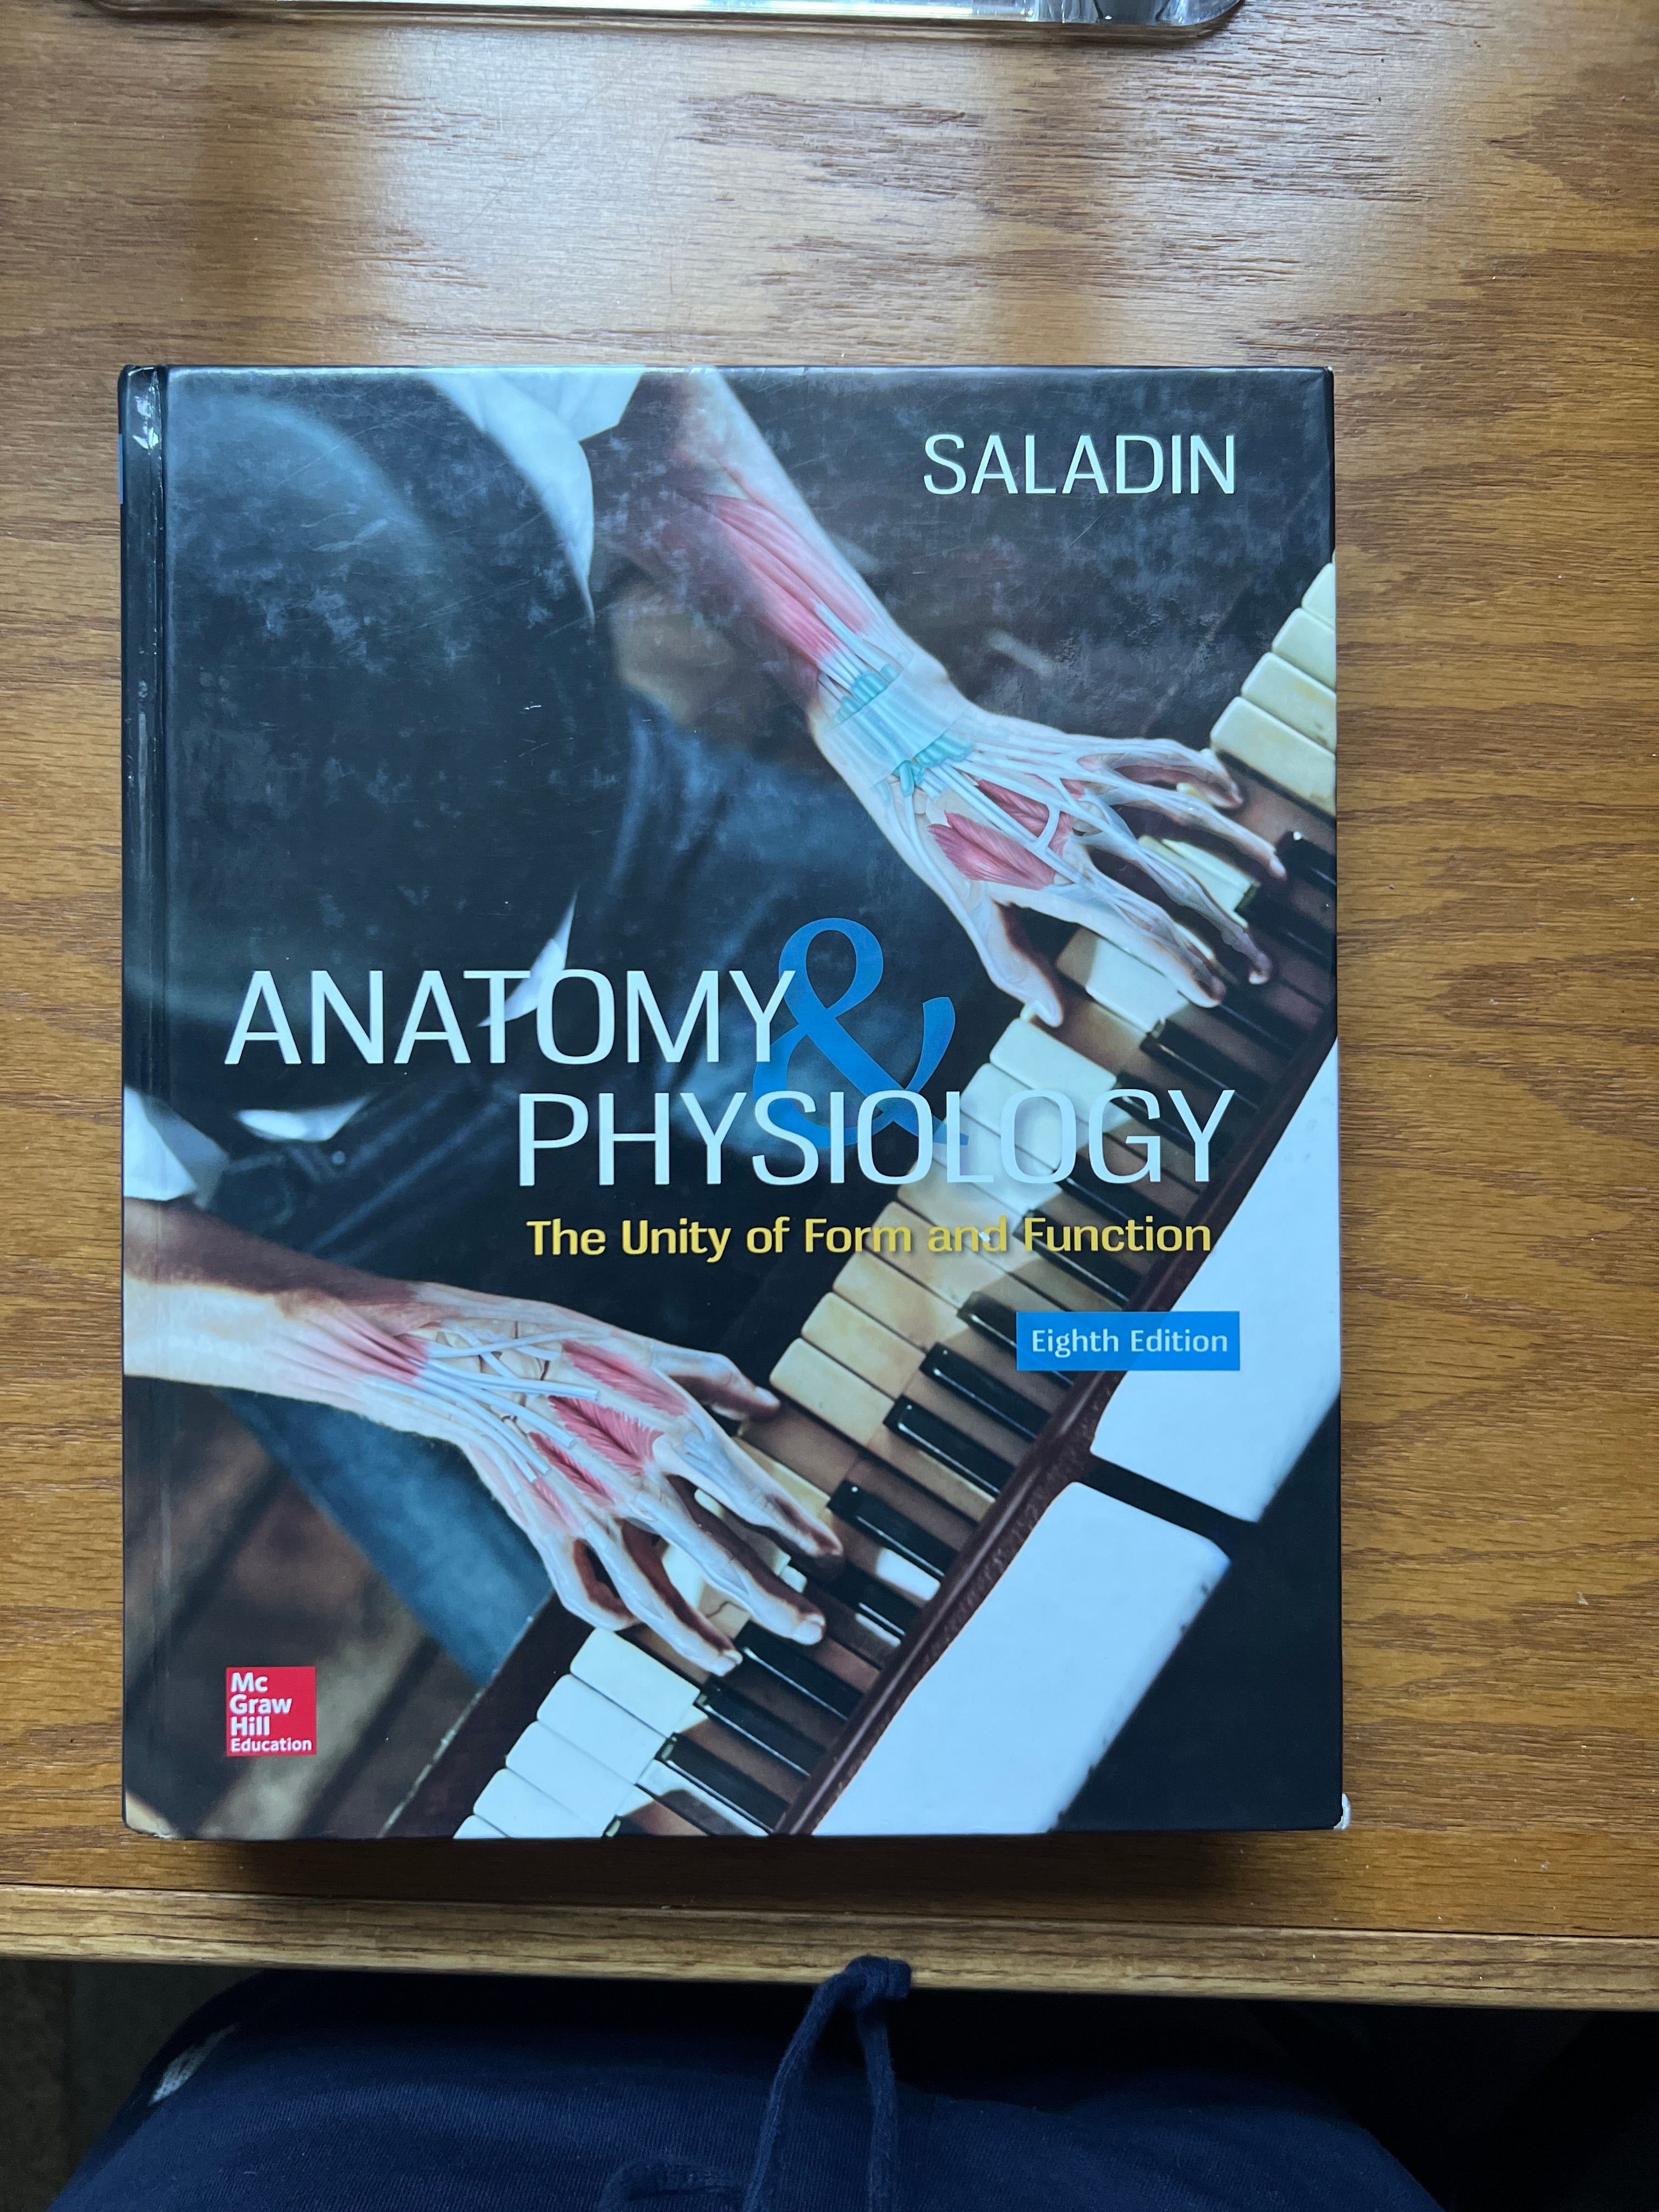 Saladin,　Function　the　and　and　Unity　S.　Hardcover　Physiology:　Anatomy　by　Kenneth　of　Form　Pangobooks